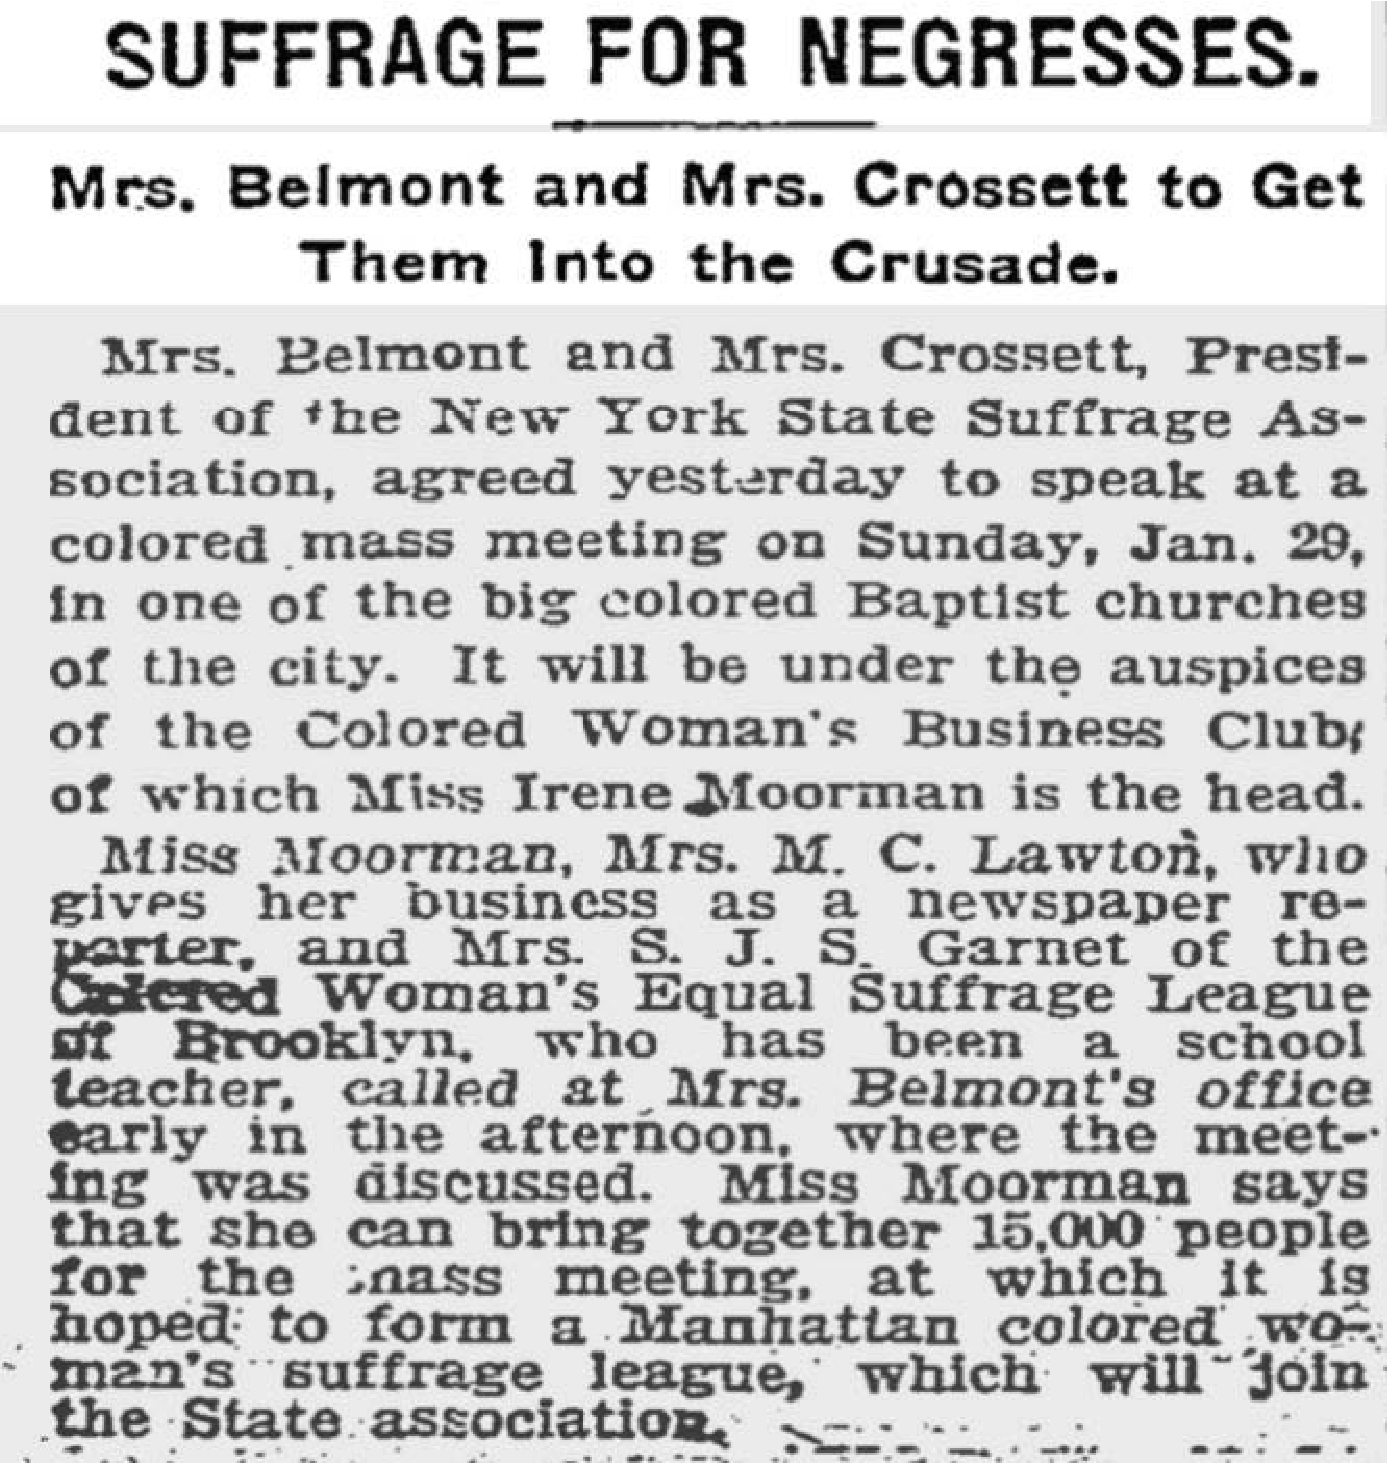 Newspaper article published by the New York Times, January 19, 1910.  Courtesy of the New York State Women's Suffrage Exhibition Collection. https://cdm16694.contentdm.oclc.org/digital/collection/p16694coll52/id/672